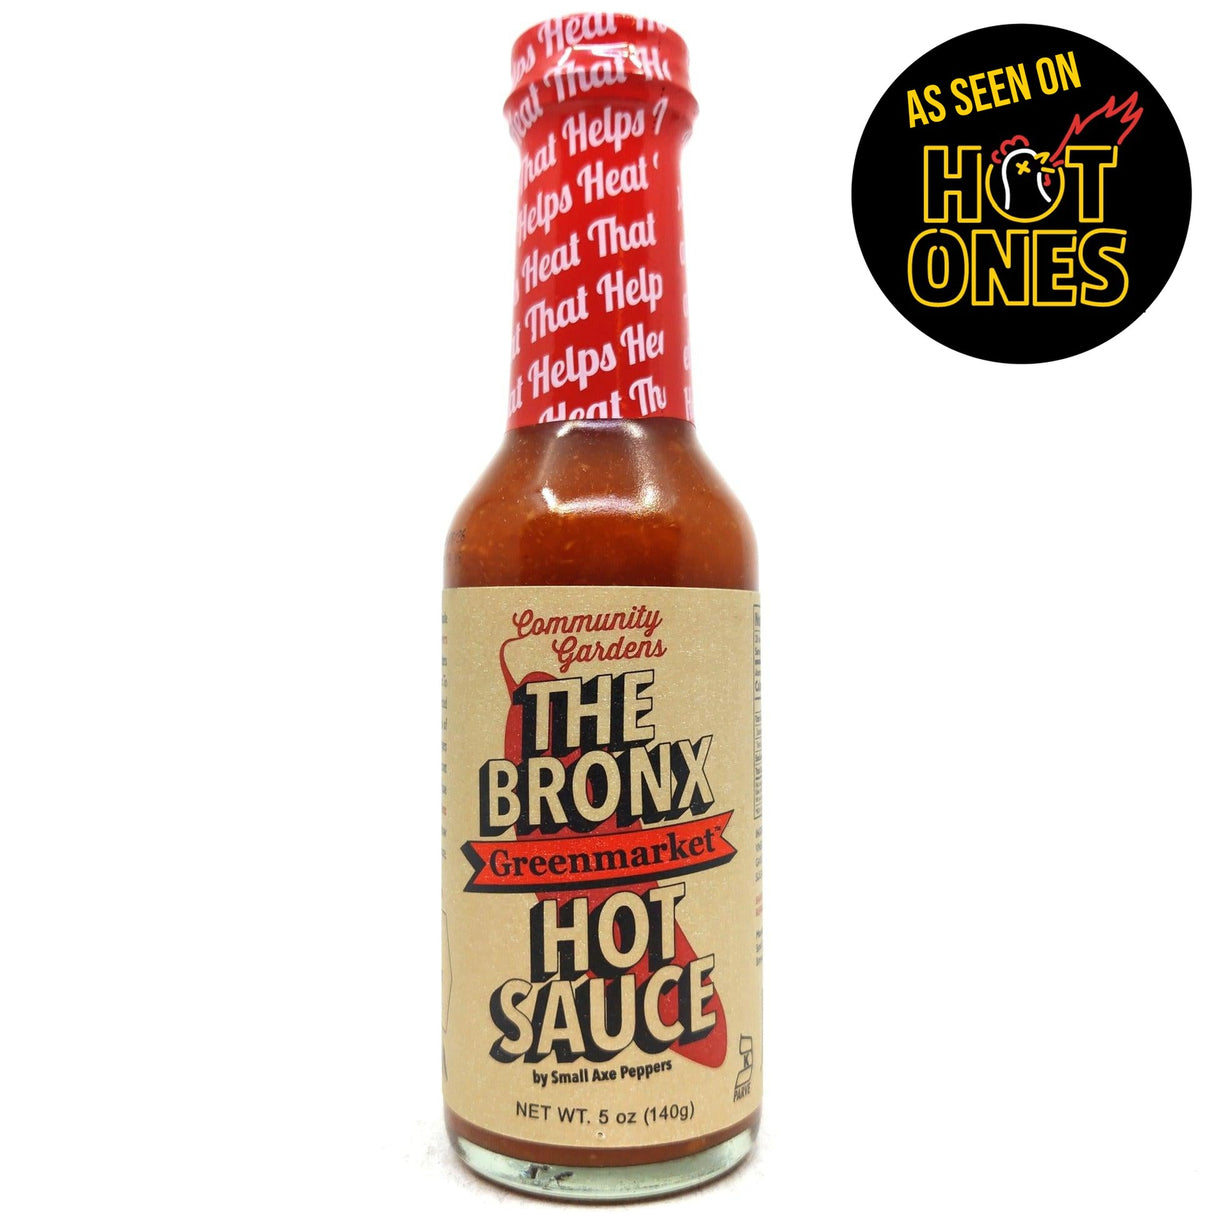 Small Axe Peppers The Bronx Greenmarket Red Hot Sauce (140g)-Hop Burns & Black